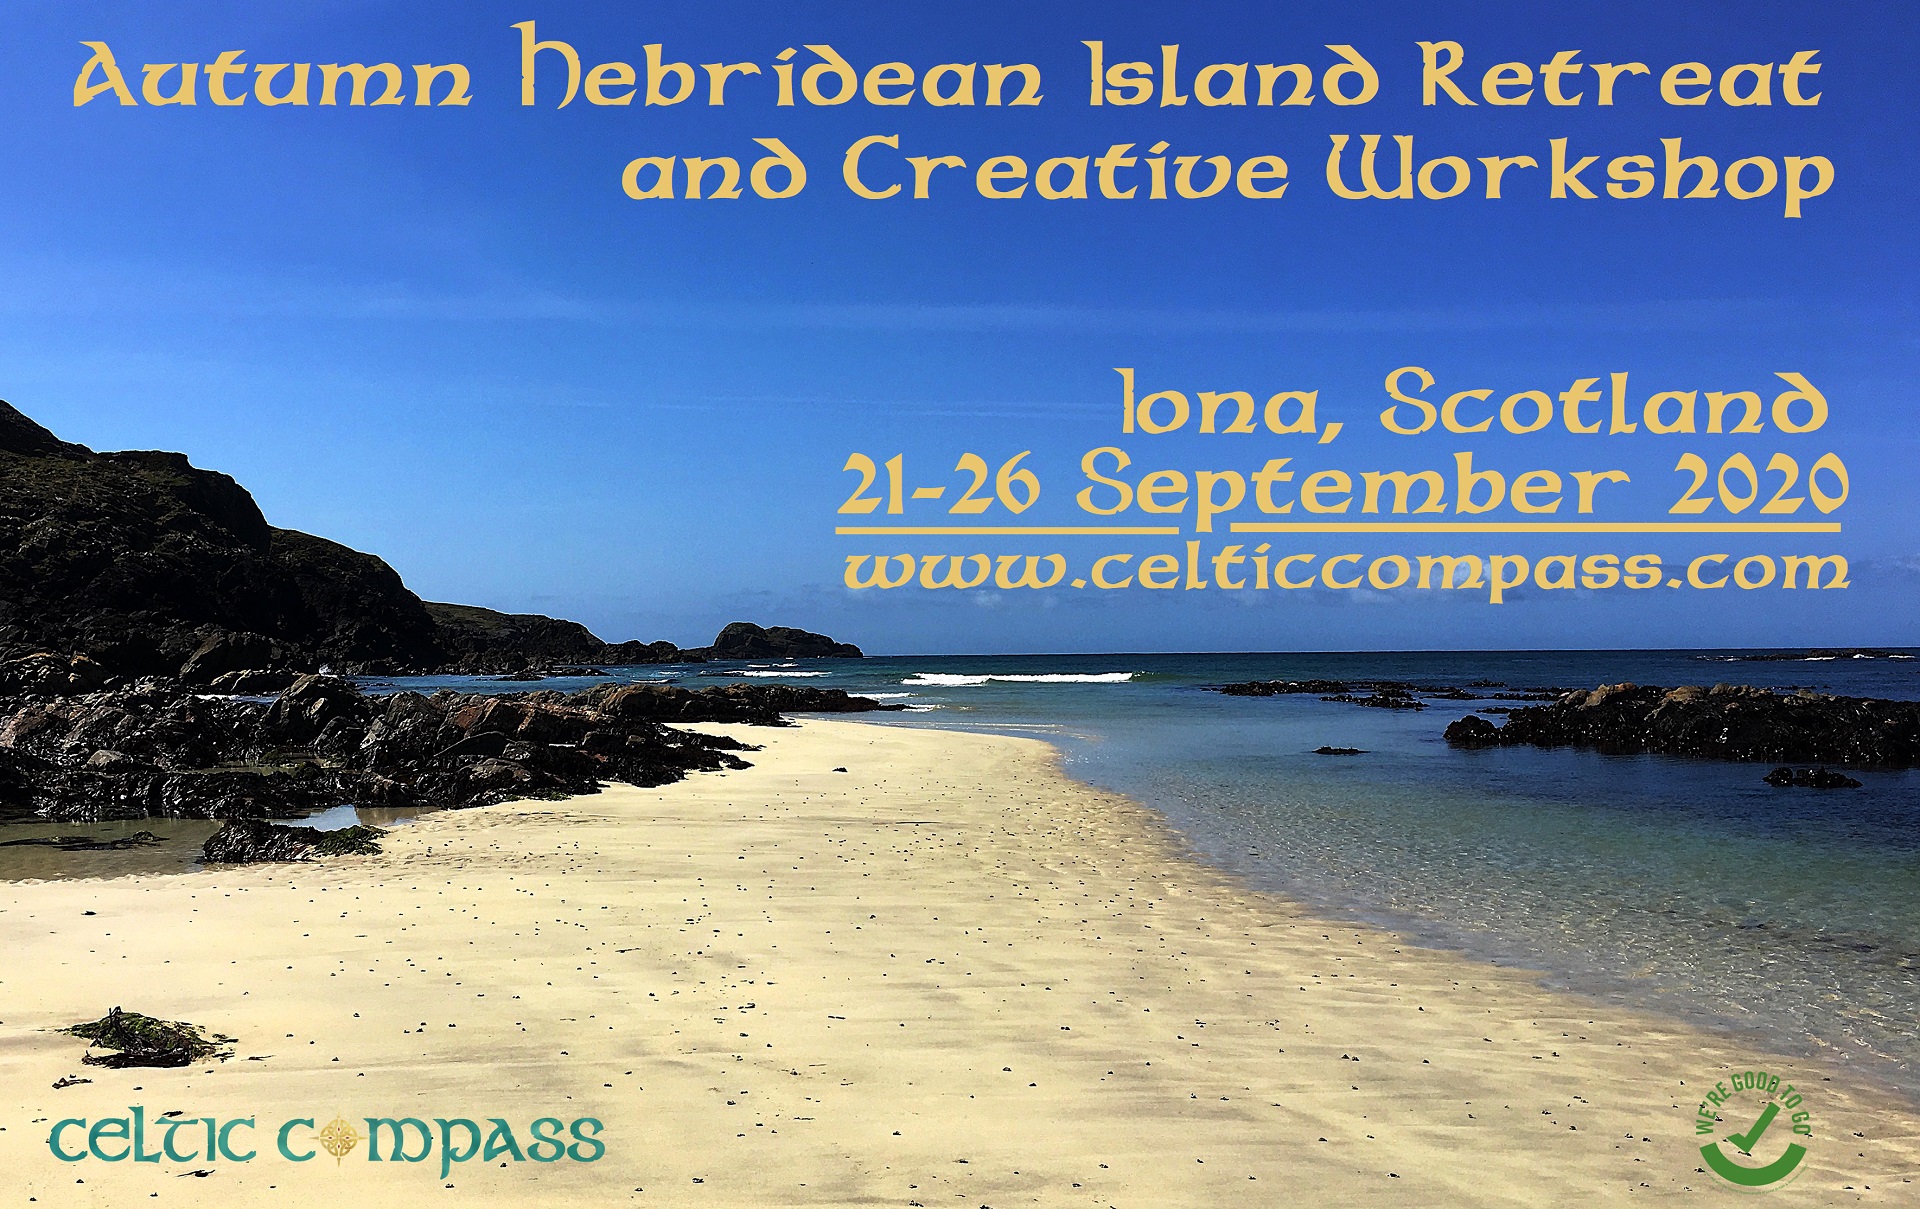 Celtic Compass's Autumn Hebridean Island Retreat and Creative Workshop will take place 21-26 September 2020. Click to enlarge.